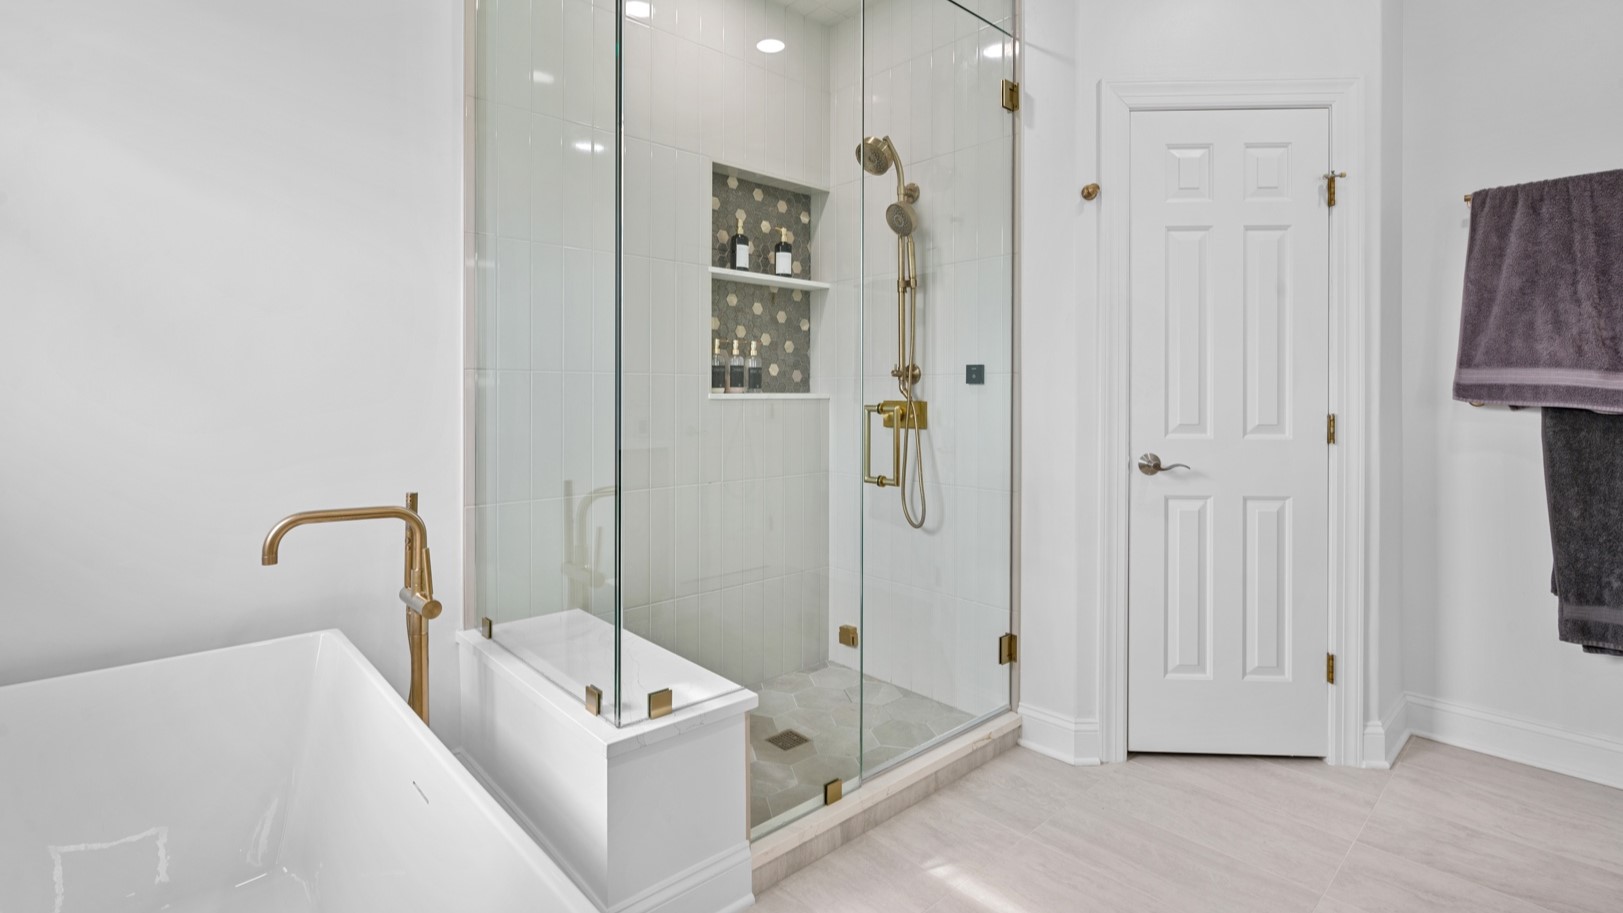 Brand new bathroom remodeling project by 4Ever Remodeling with new white bathtub and modern glass shower unit